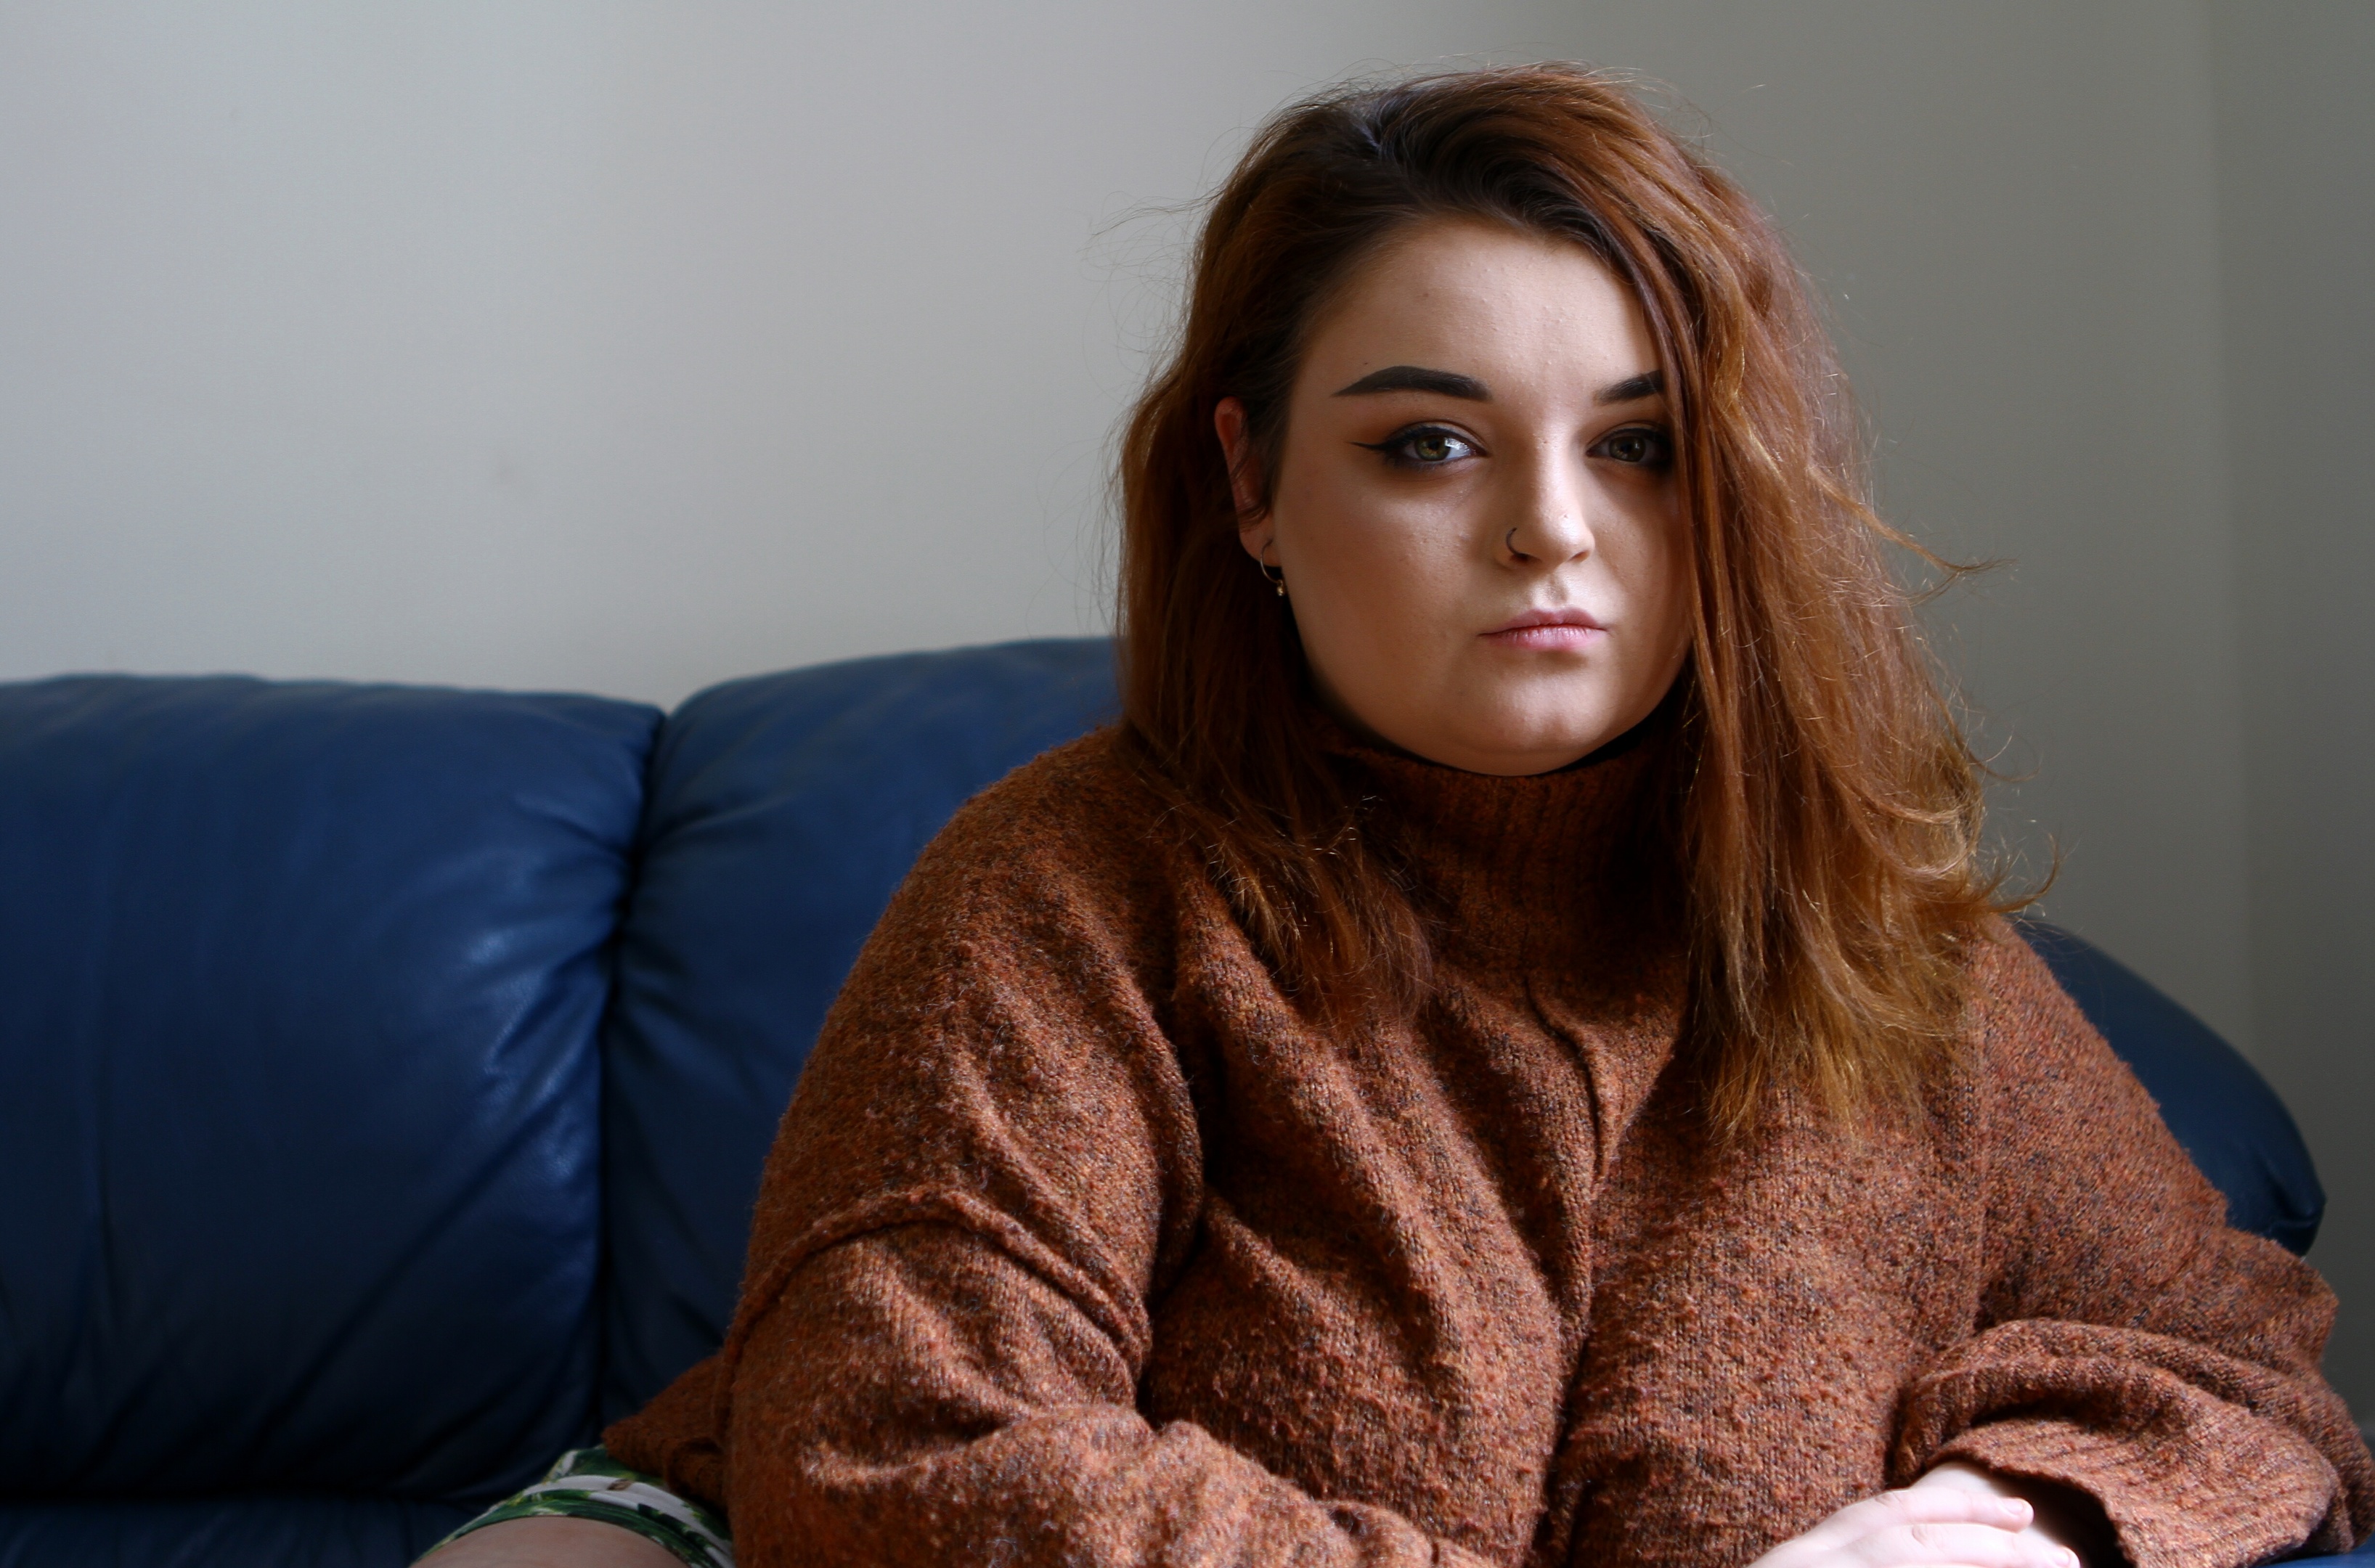 Ellie Irving has bravely spoken out after being followed home by a stranger